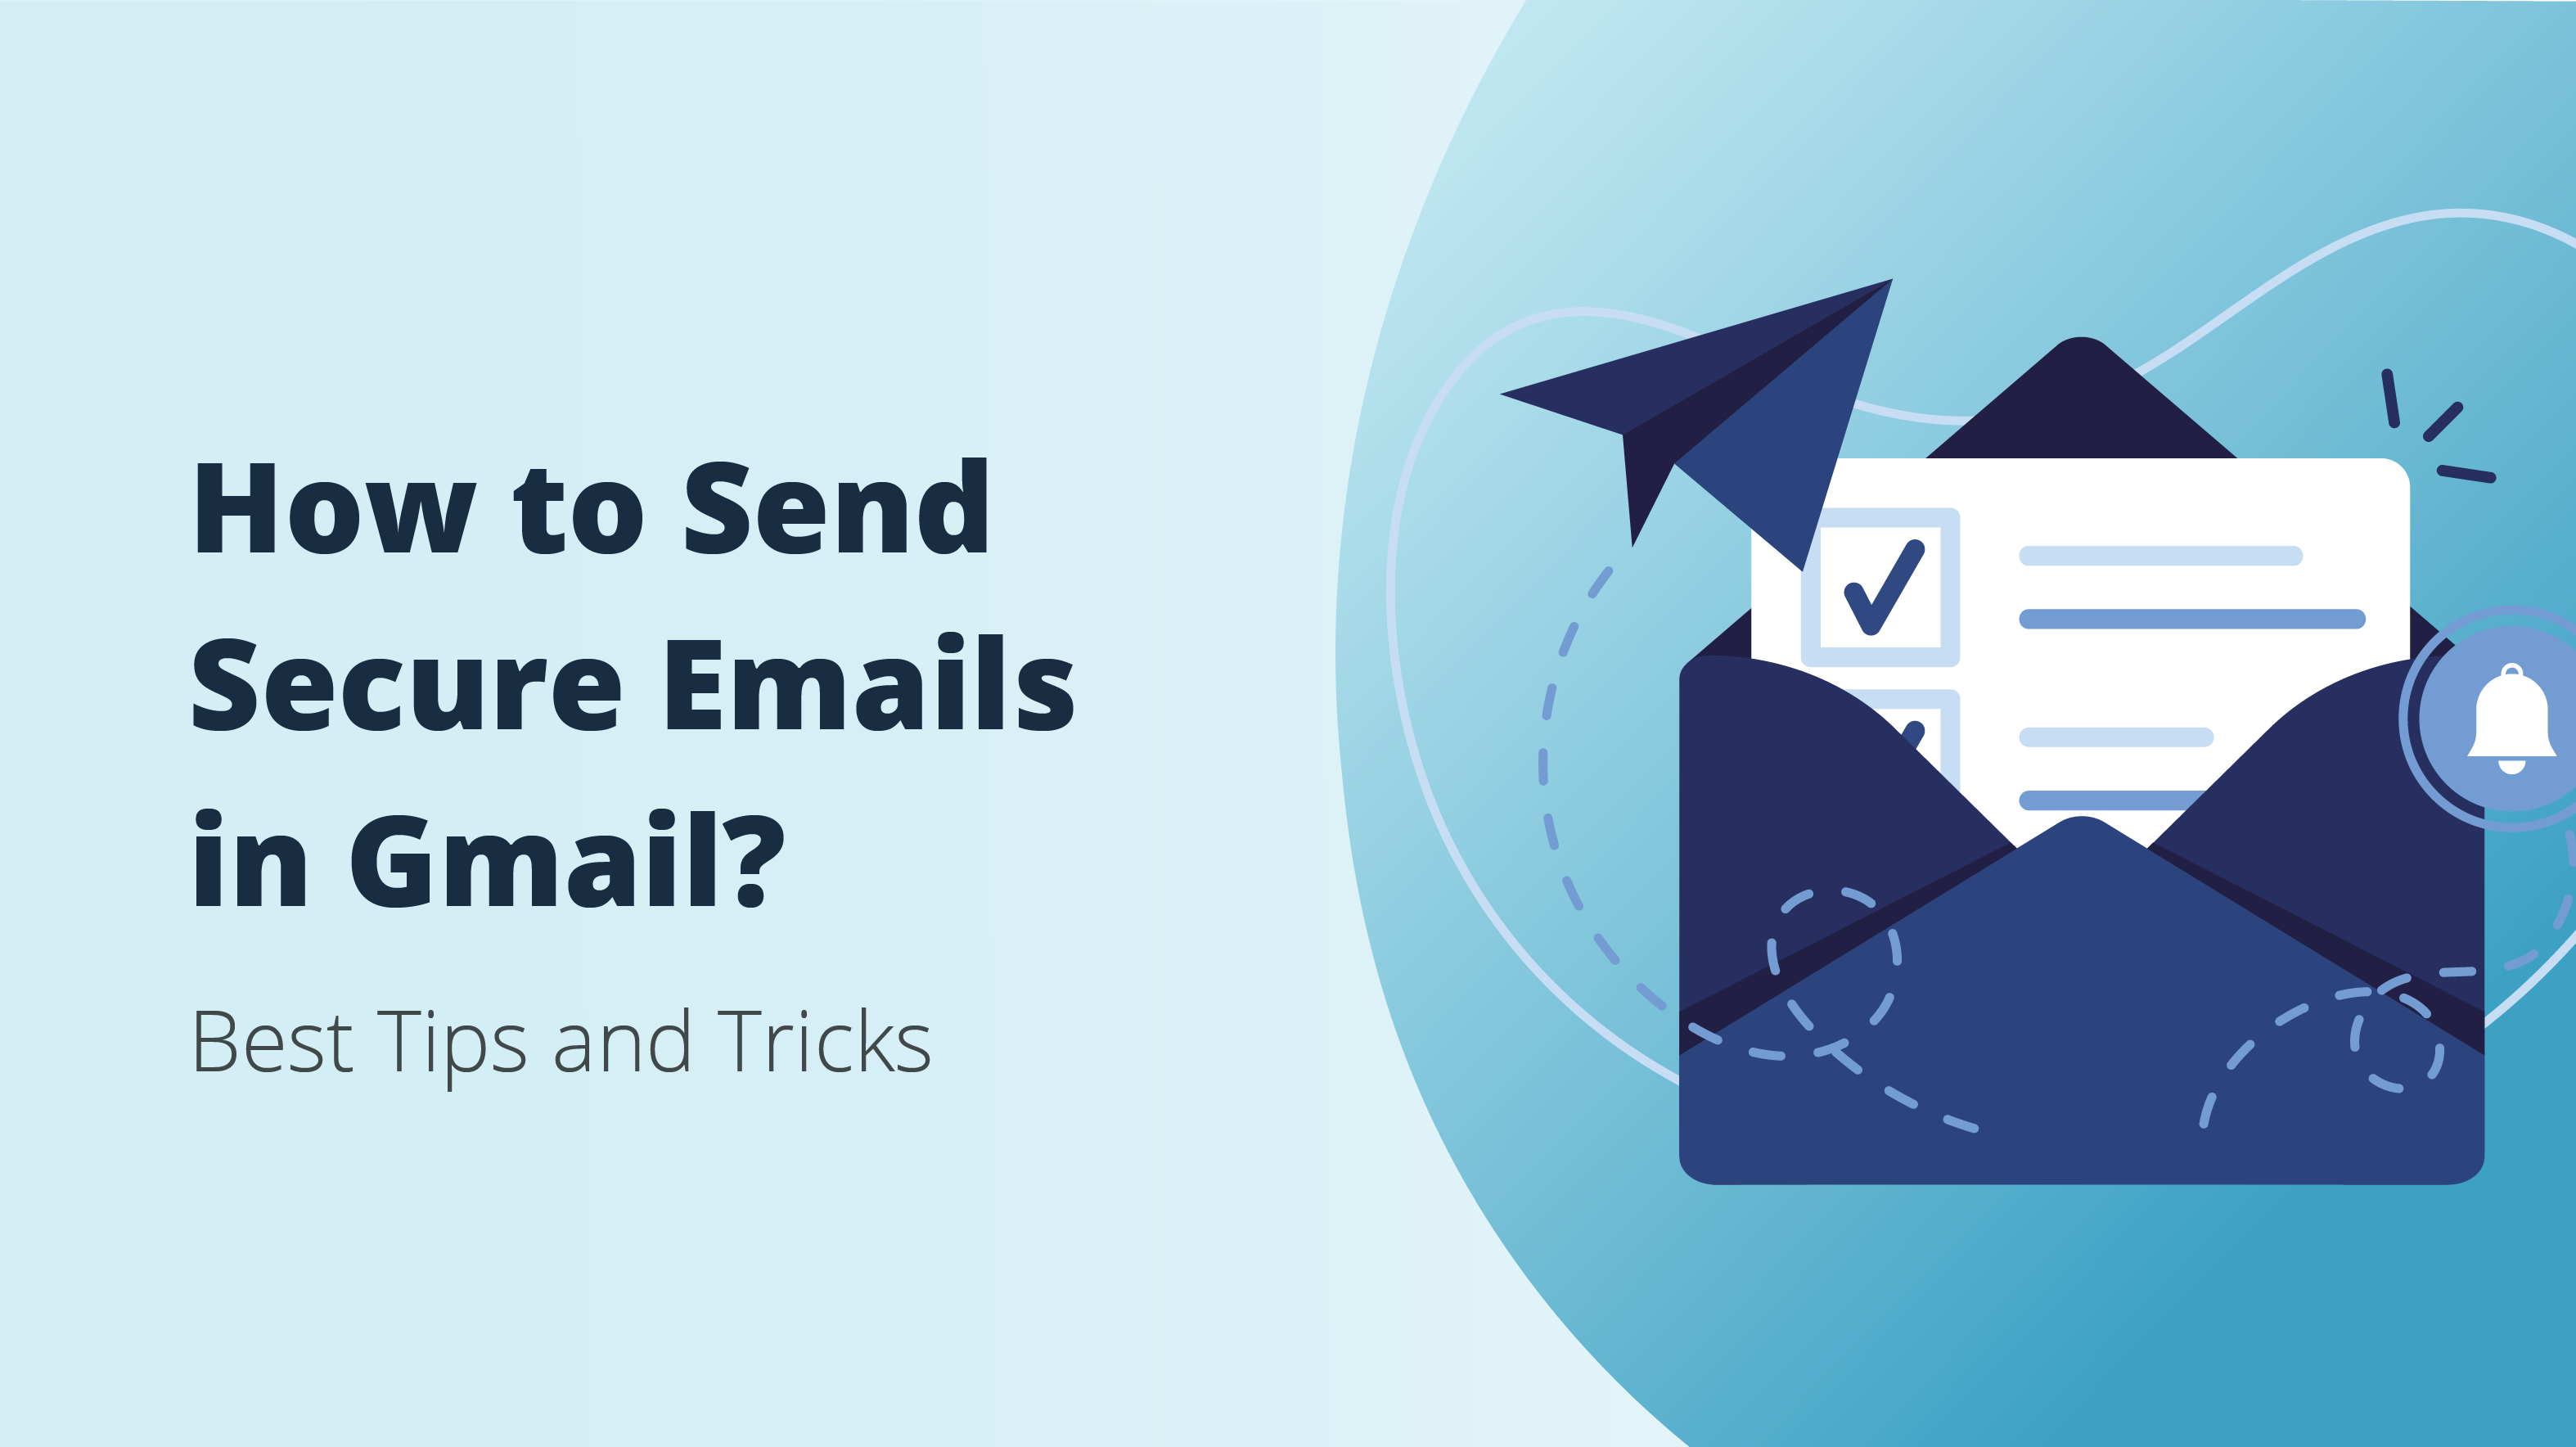 How to send secure emails in Gmail